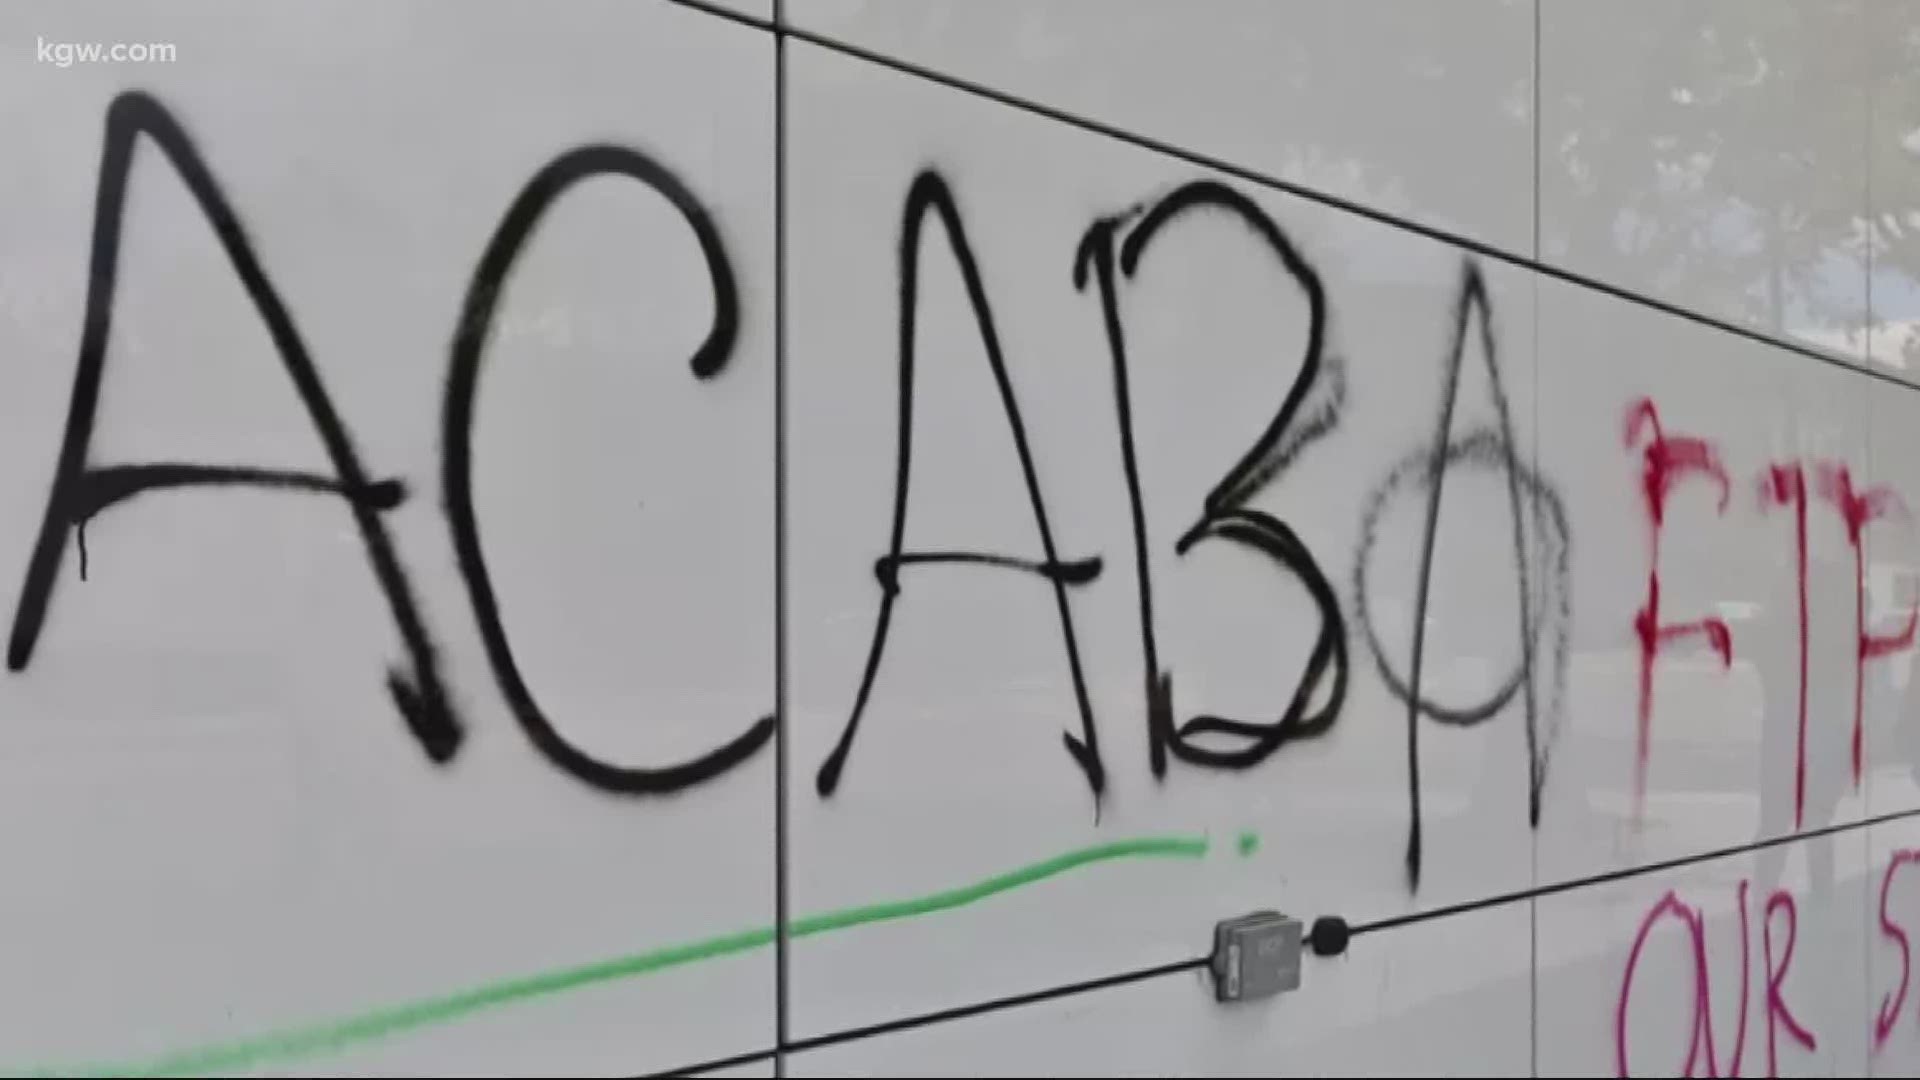 What does “ACAB” mean and where does it come from?